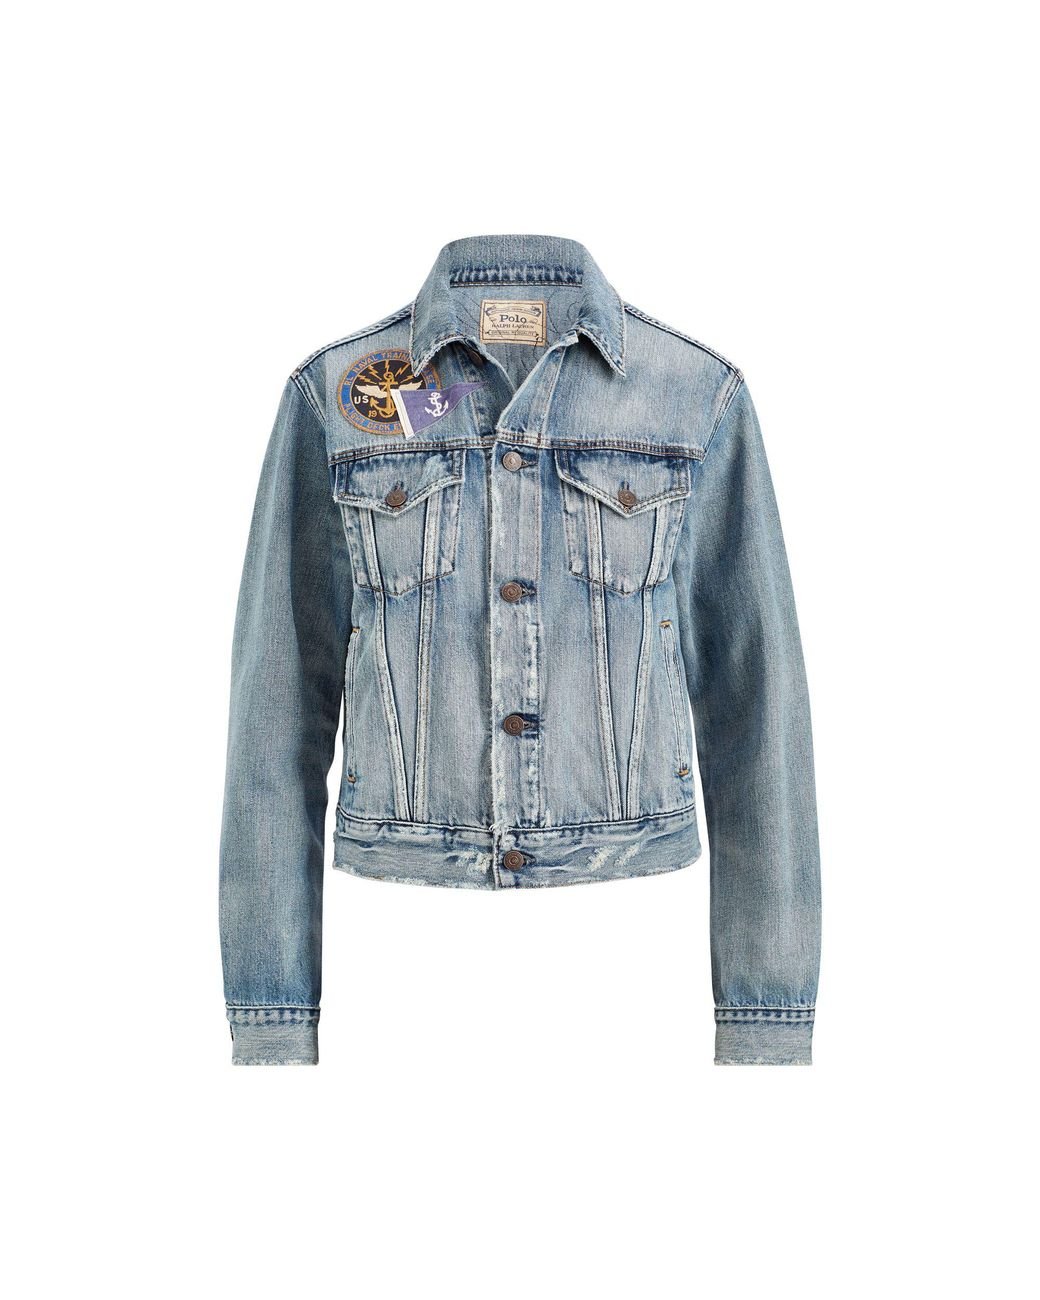 Polo Ralph Lauren Denim Jacket With Patches in Blue